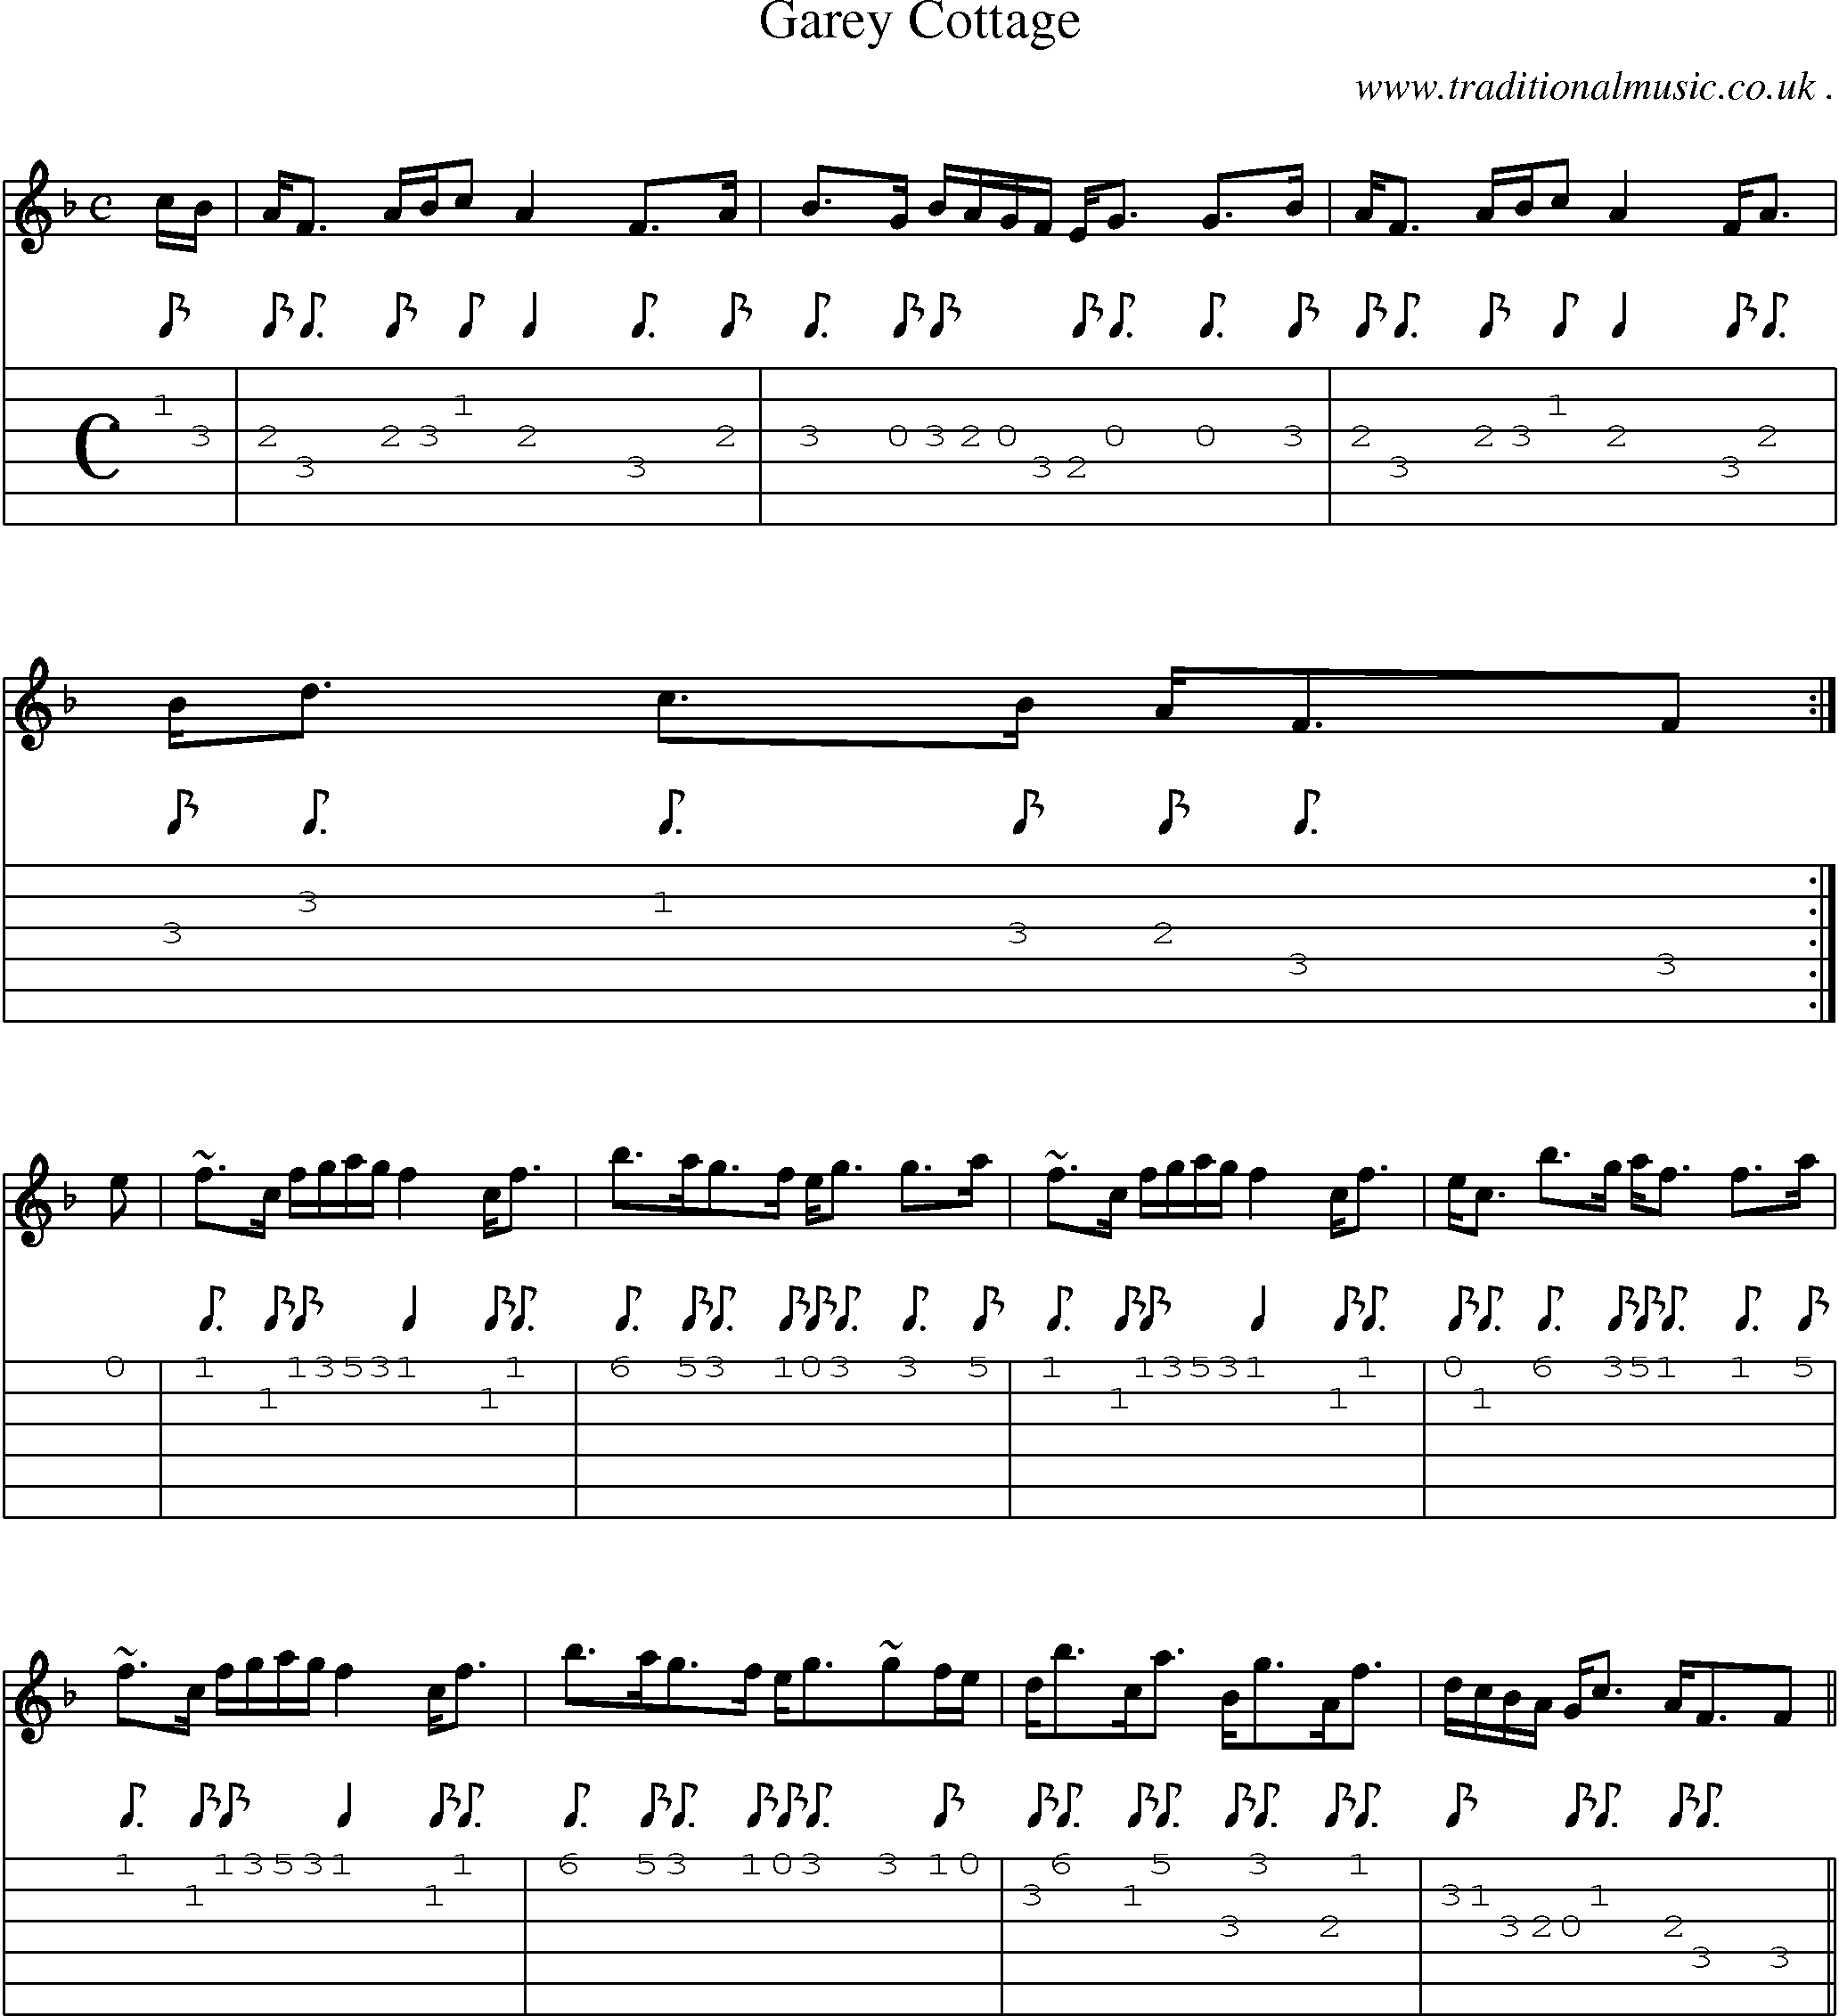 Sheet-music  score, Chords and Guitar Tabs for Garey Cottage